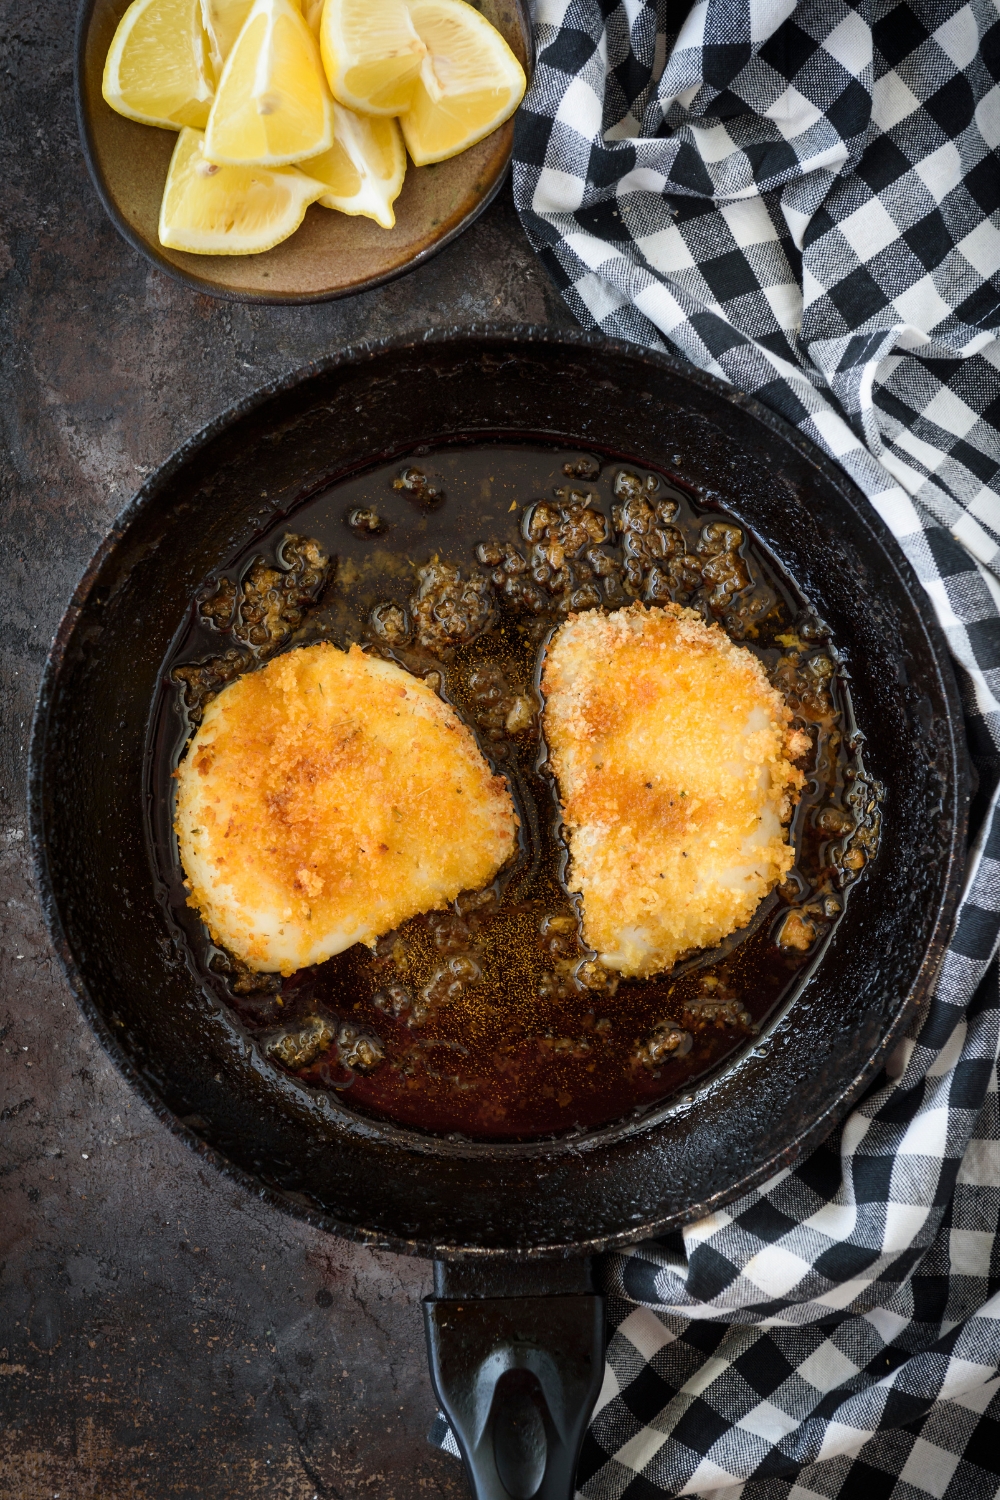 A skillet with two breaded calamari steaks frying in the skillet.